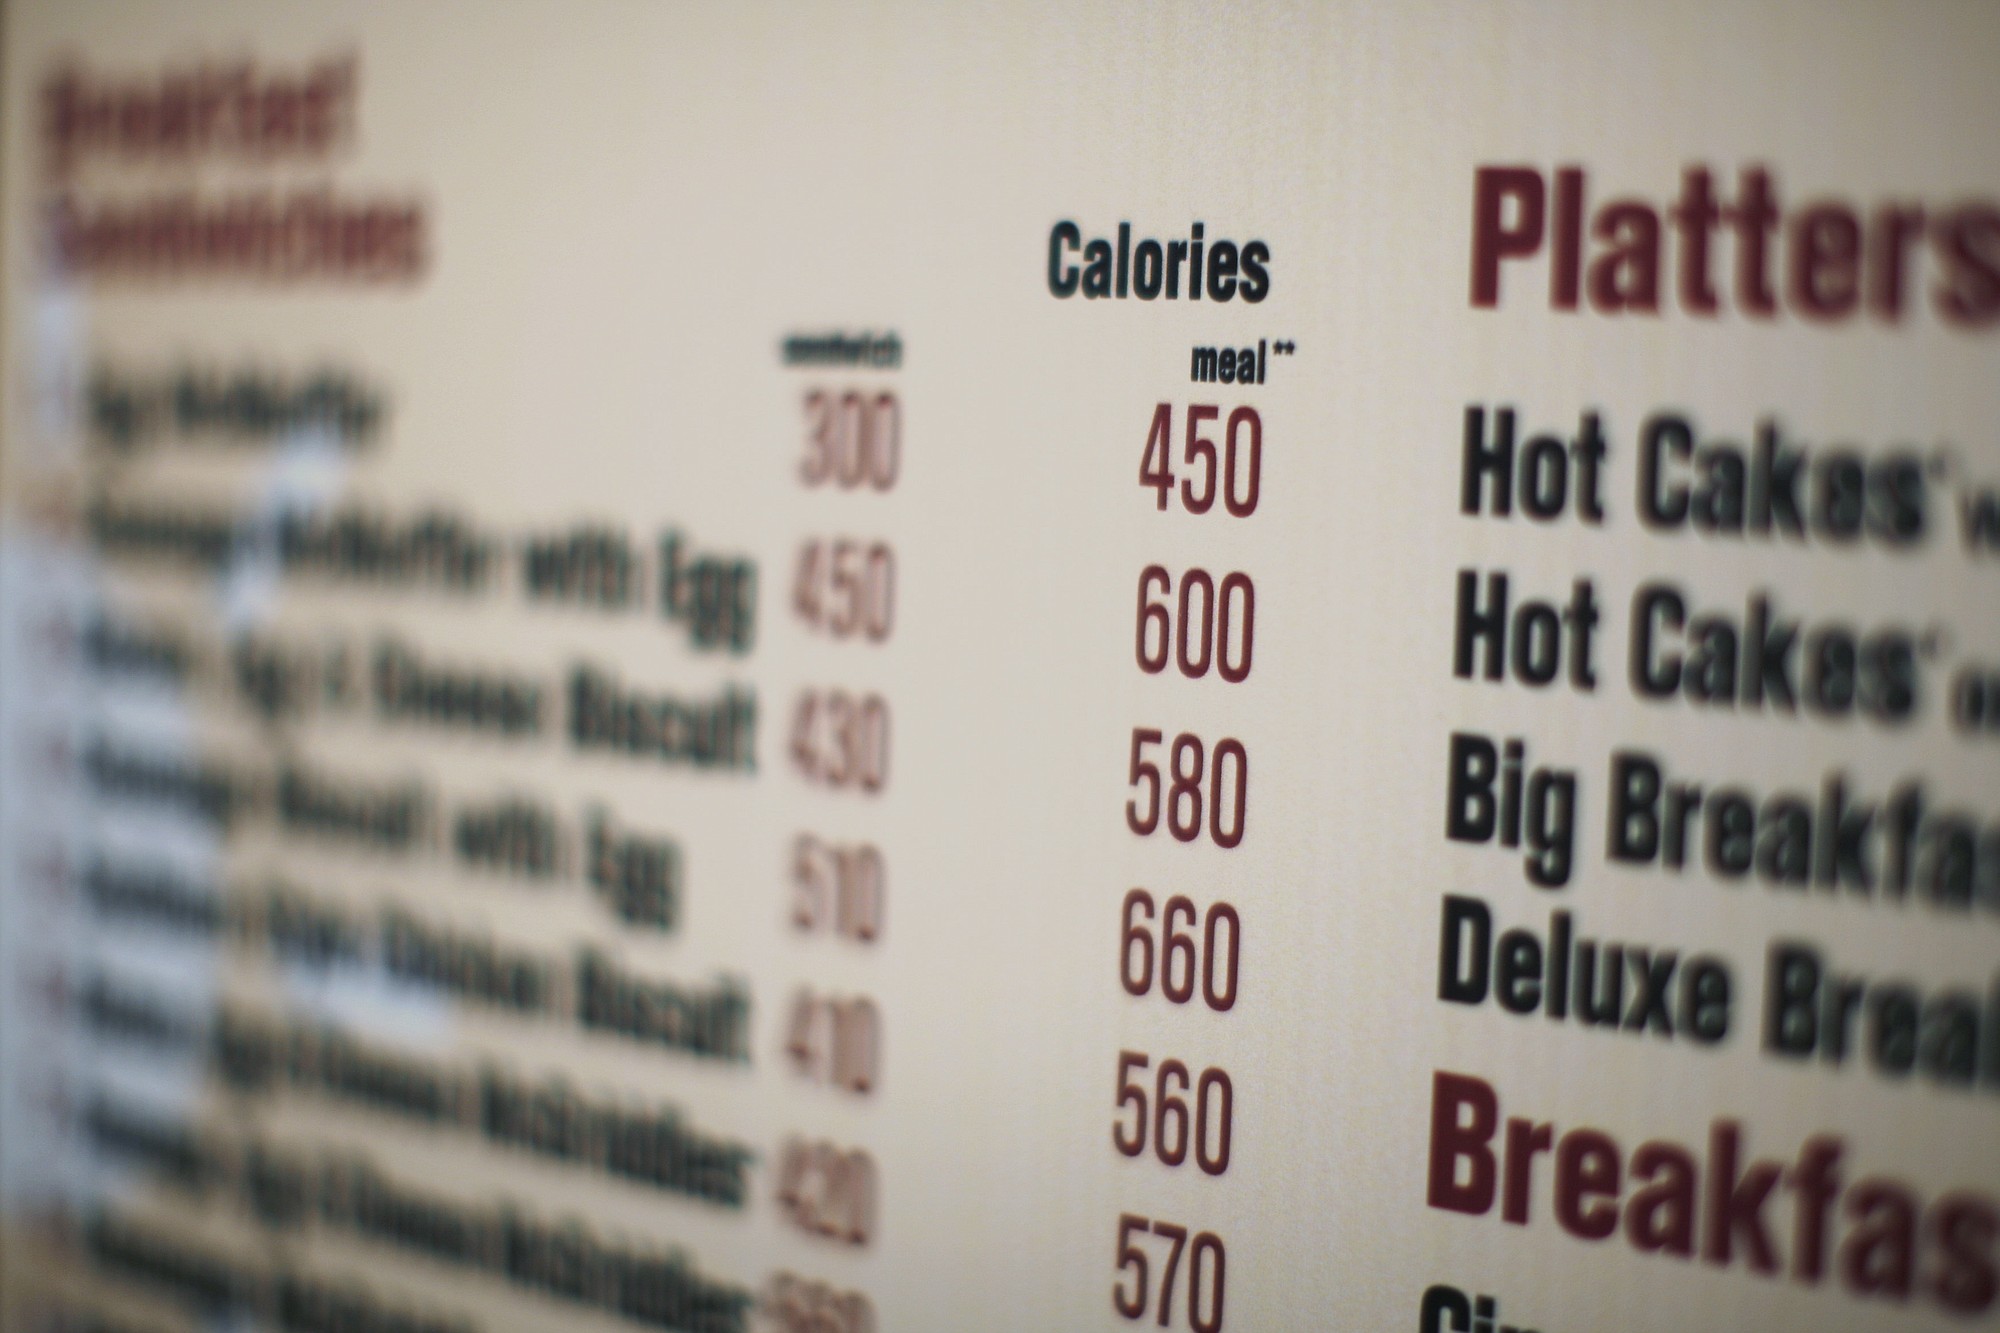 FILE - In this July 18, 2008 file photo, calories of each food item appear on a McDonalds drive-thru menu in New York.   The Food and Drug Administration announced long-delayed calorie labeling rules Tuesday, requiring establishments that sell prepared foods and have 20 or more locations to post the calorie content of food &quot;clearly and conspicuously&quot; on their menus, menu boards and displays. Companies will have until November 2015 to comply.